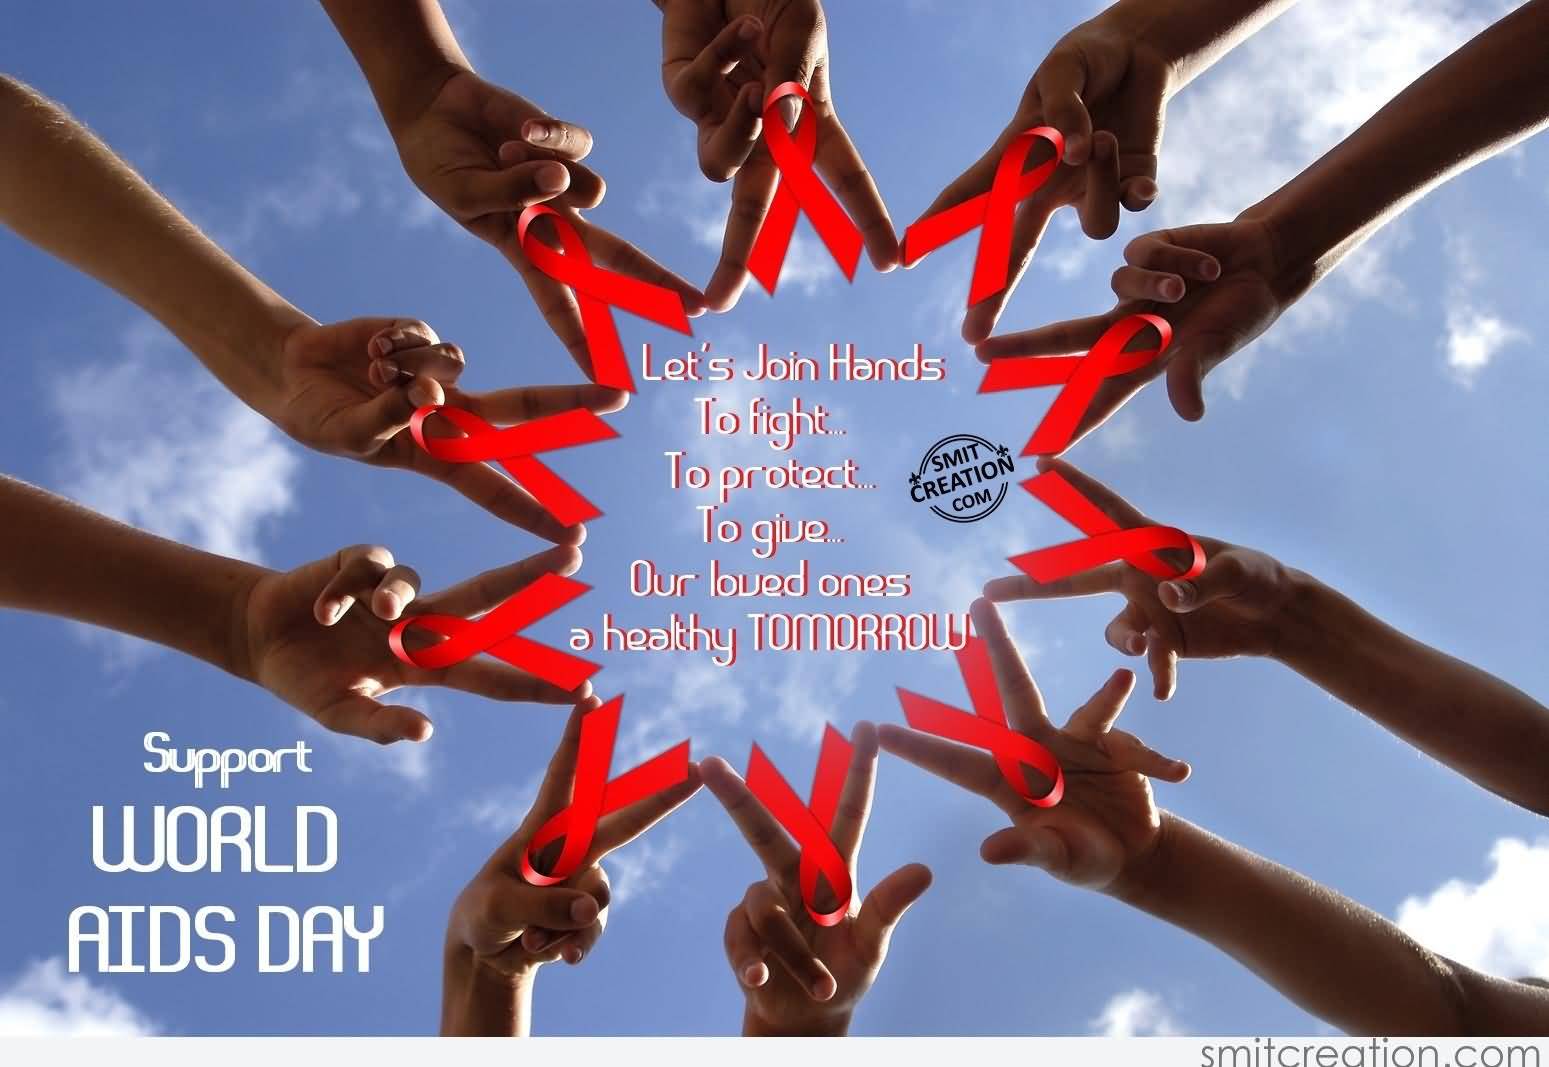 Let's Join Hands To Fight To Protect To Give Our Loved Ones A Healthy Tomorrow Support World Aids Day